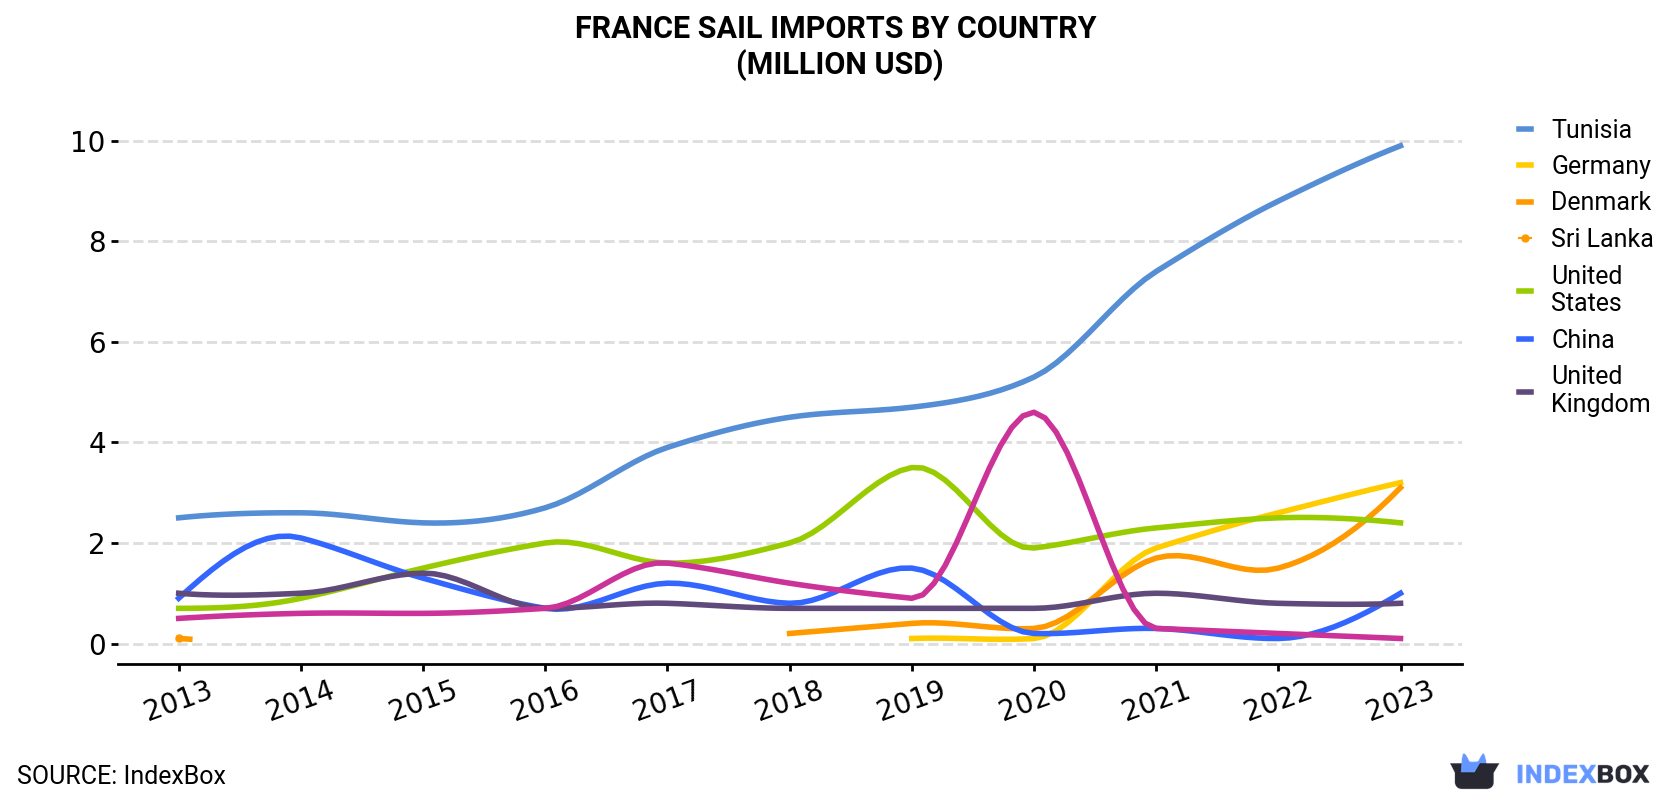 France Sail Imports By Country (Million USD)